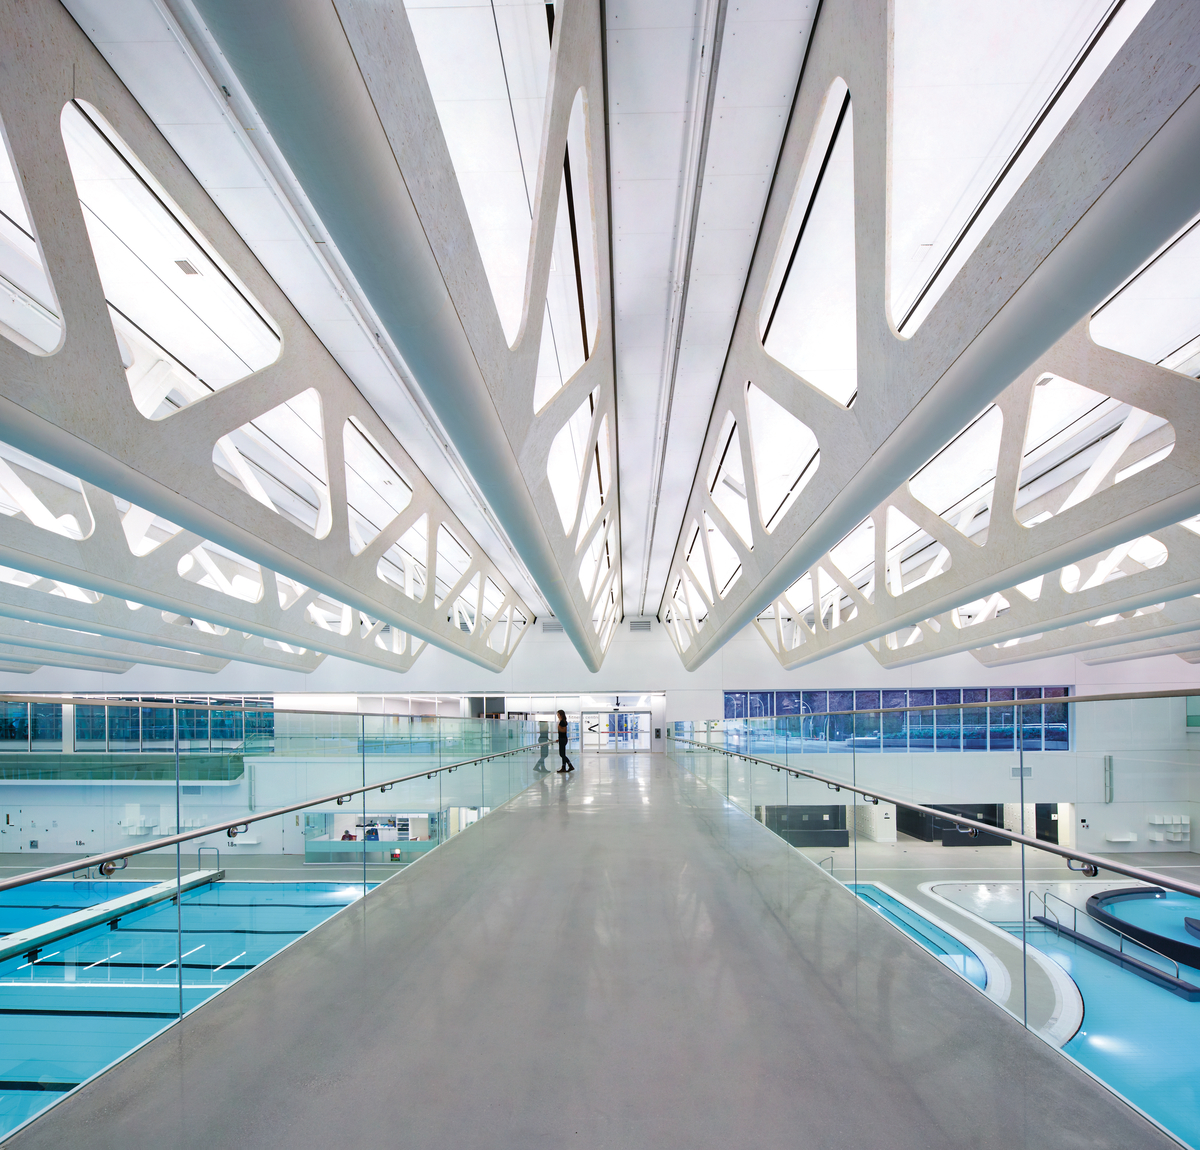 White stained Glue-laminated timber (Glulam), Laminated strand lumber (LSL), and Plywood are prominently featured in this interior view of the Guildford Aquatic Centre